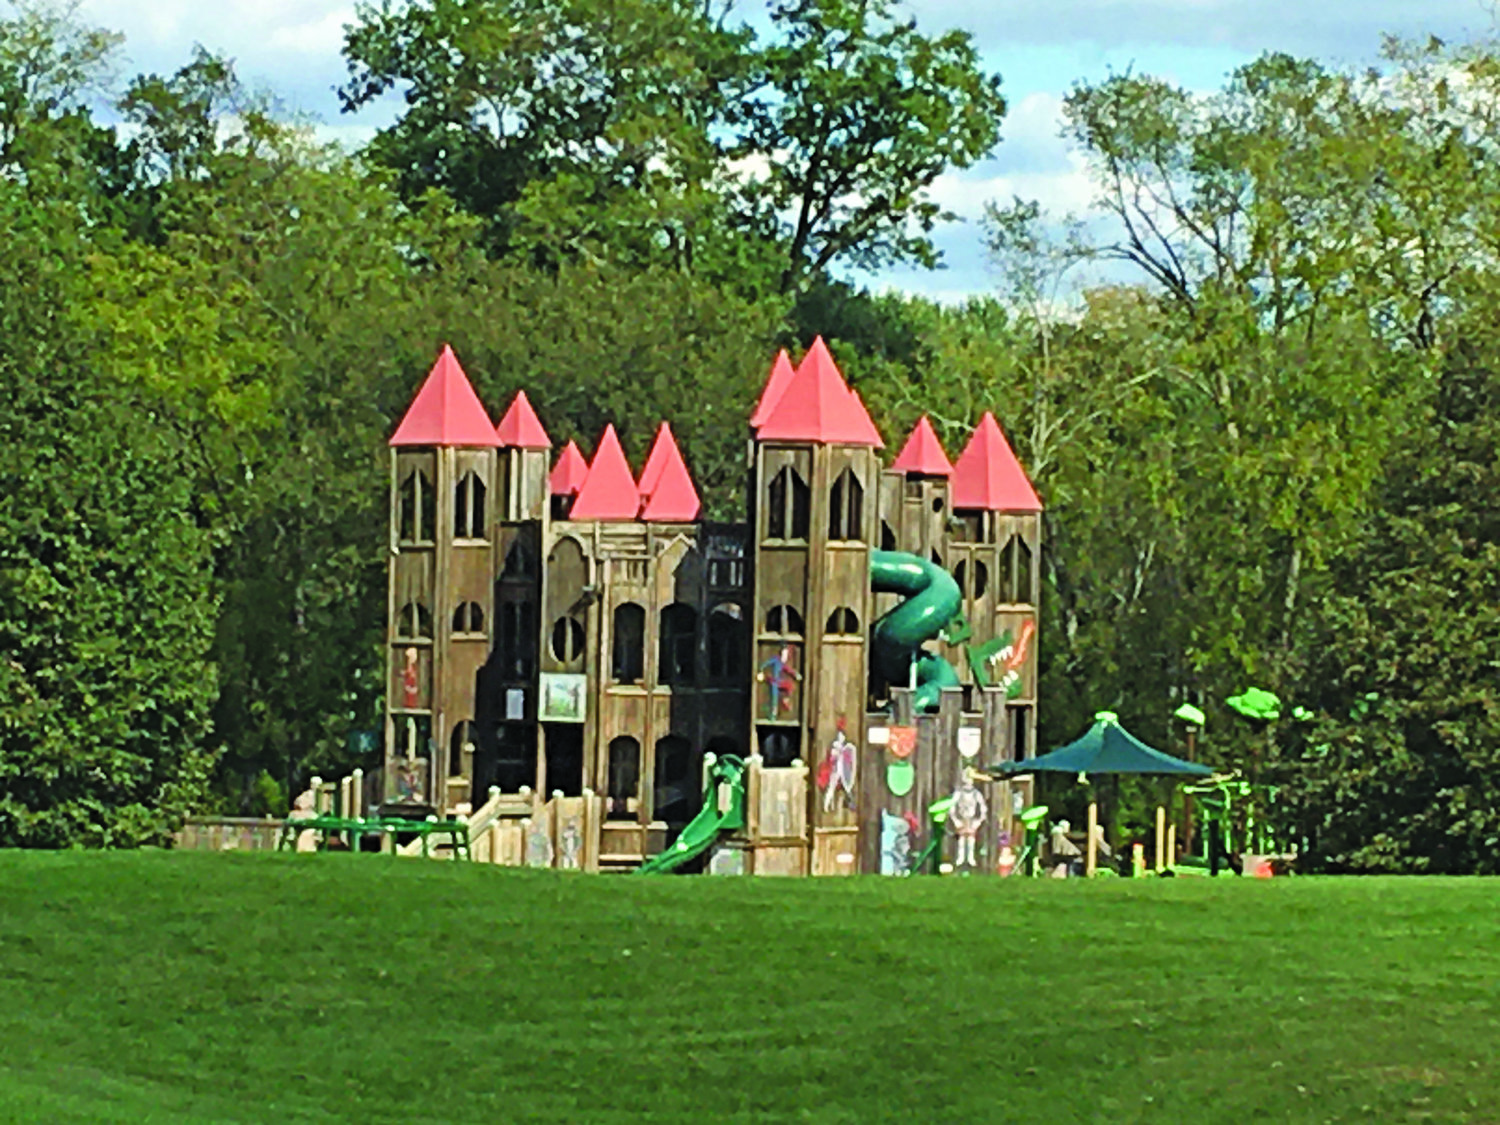 Kids Castle in Doylestown Township’s Central Park is closed until at least the end of the year, as improvements are made to make it more accessible for children with all abilities, officials said.